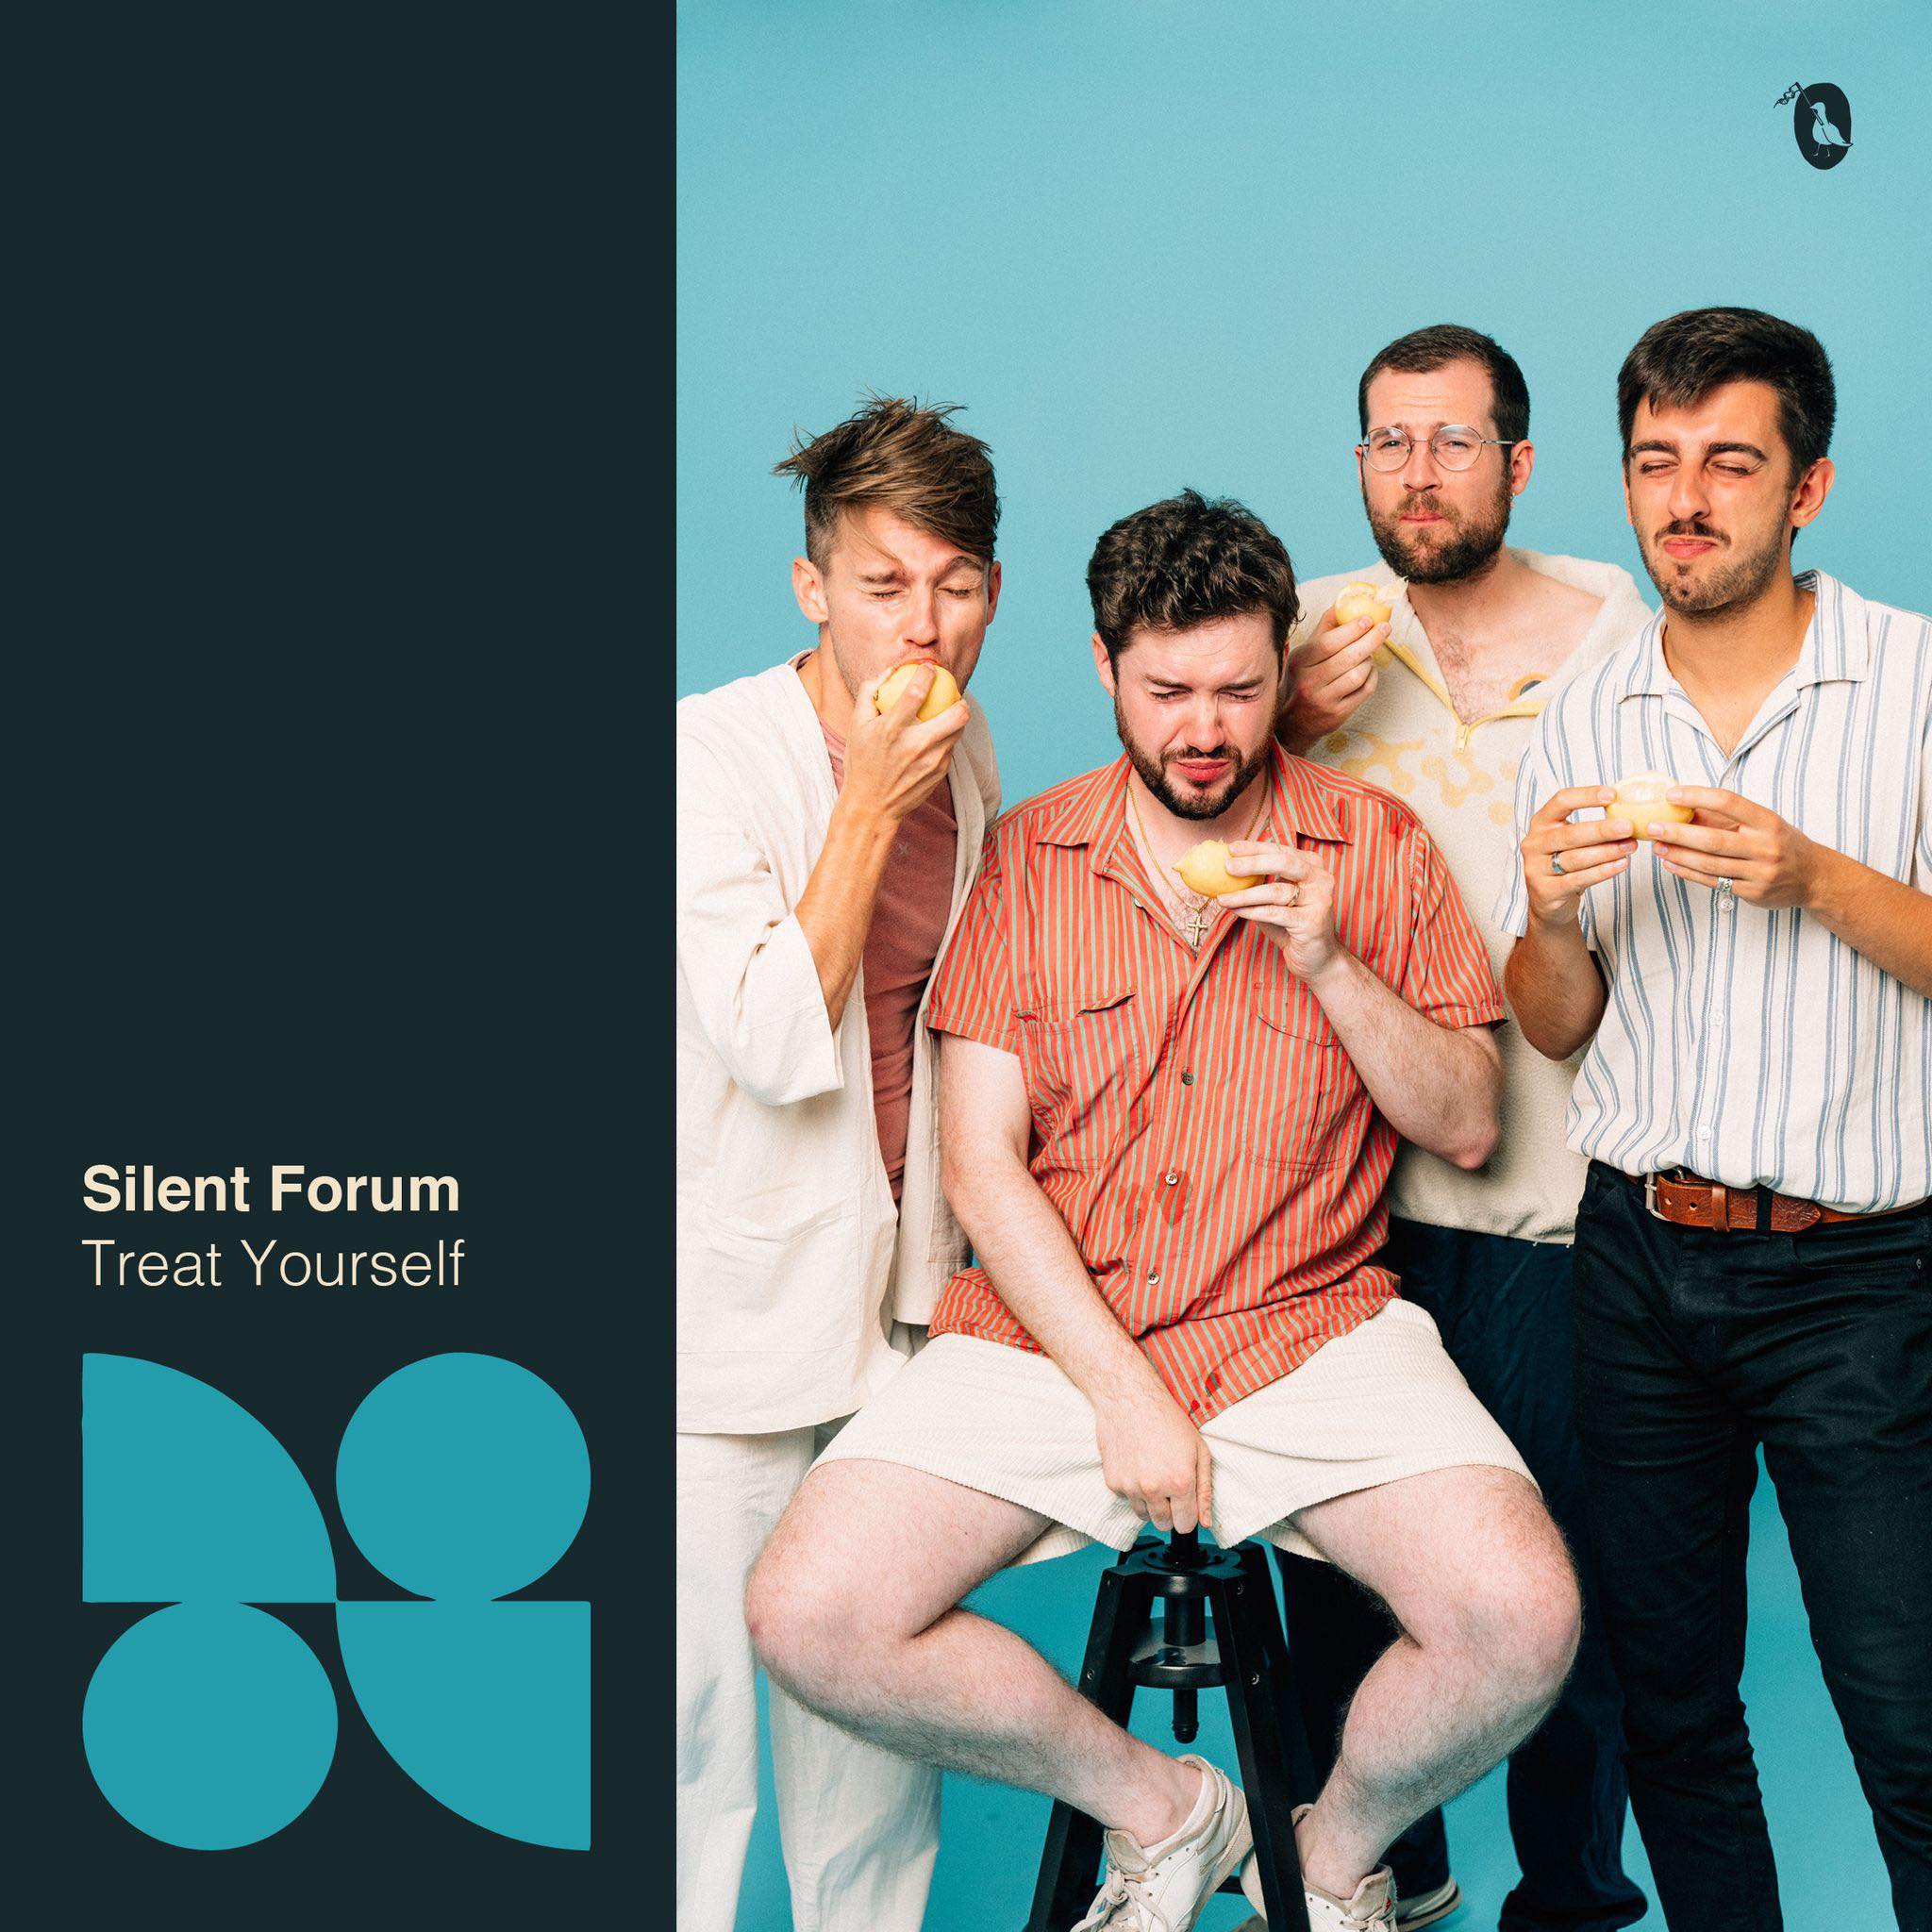 HOT TRACK: “Treat Yourself” by Silent Forum